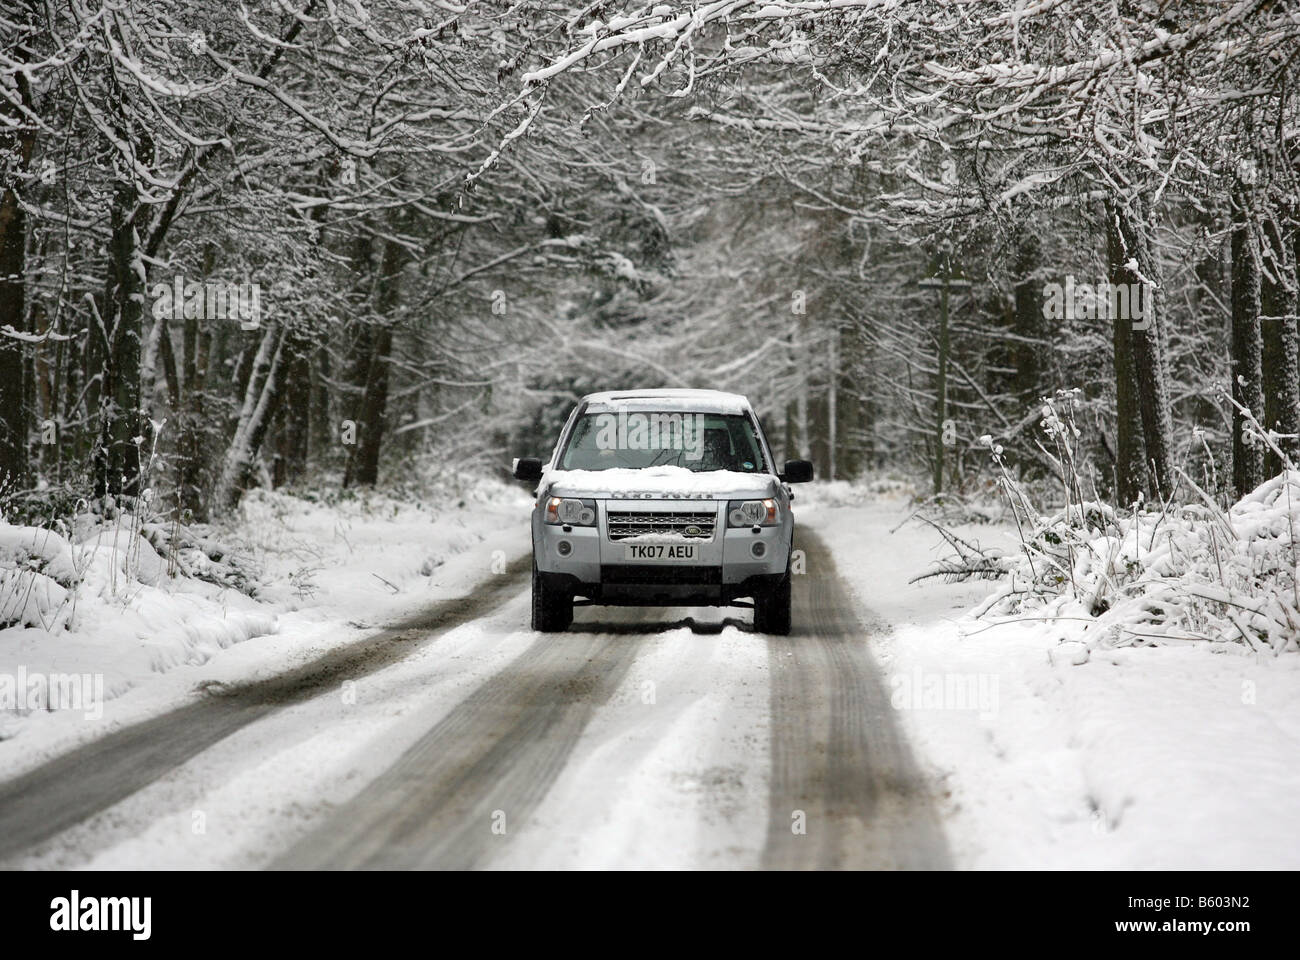 Land Rover Freelander 2 four wheel drive vehicle driving along a snow covered rural road in winter, in Scotland, UK Stock Photo